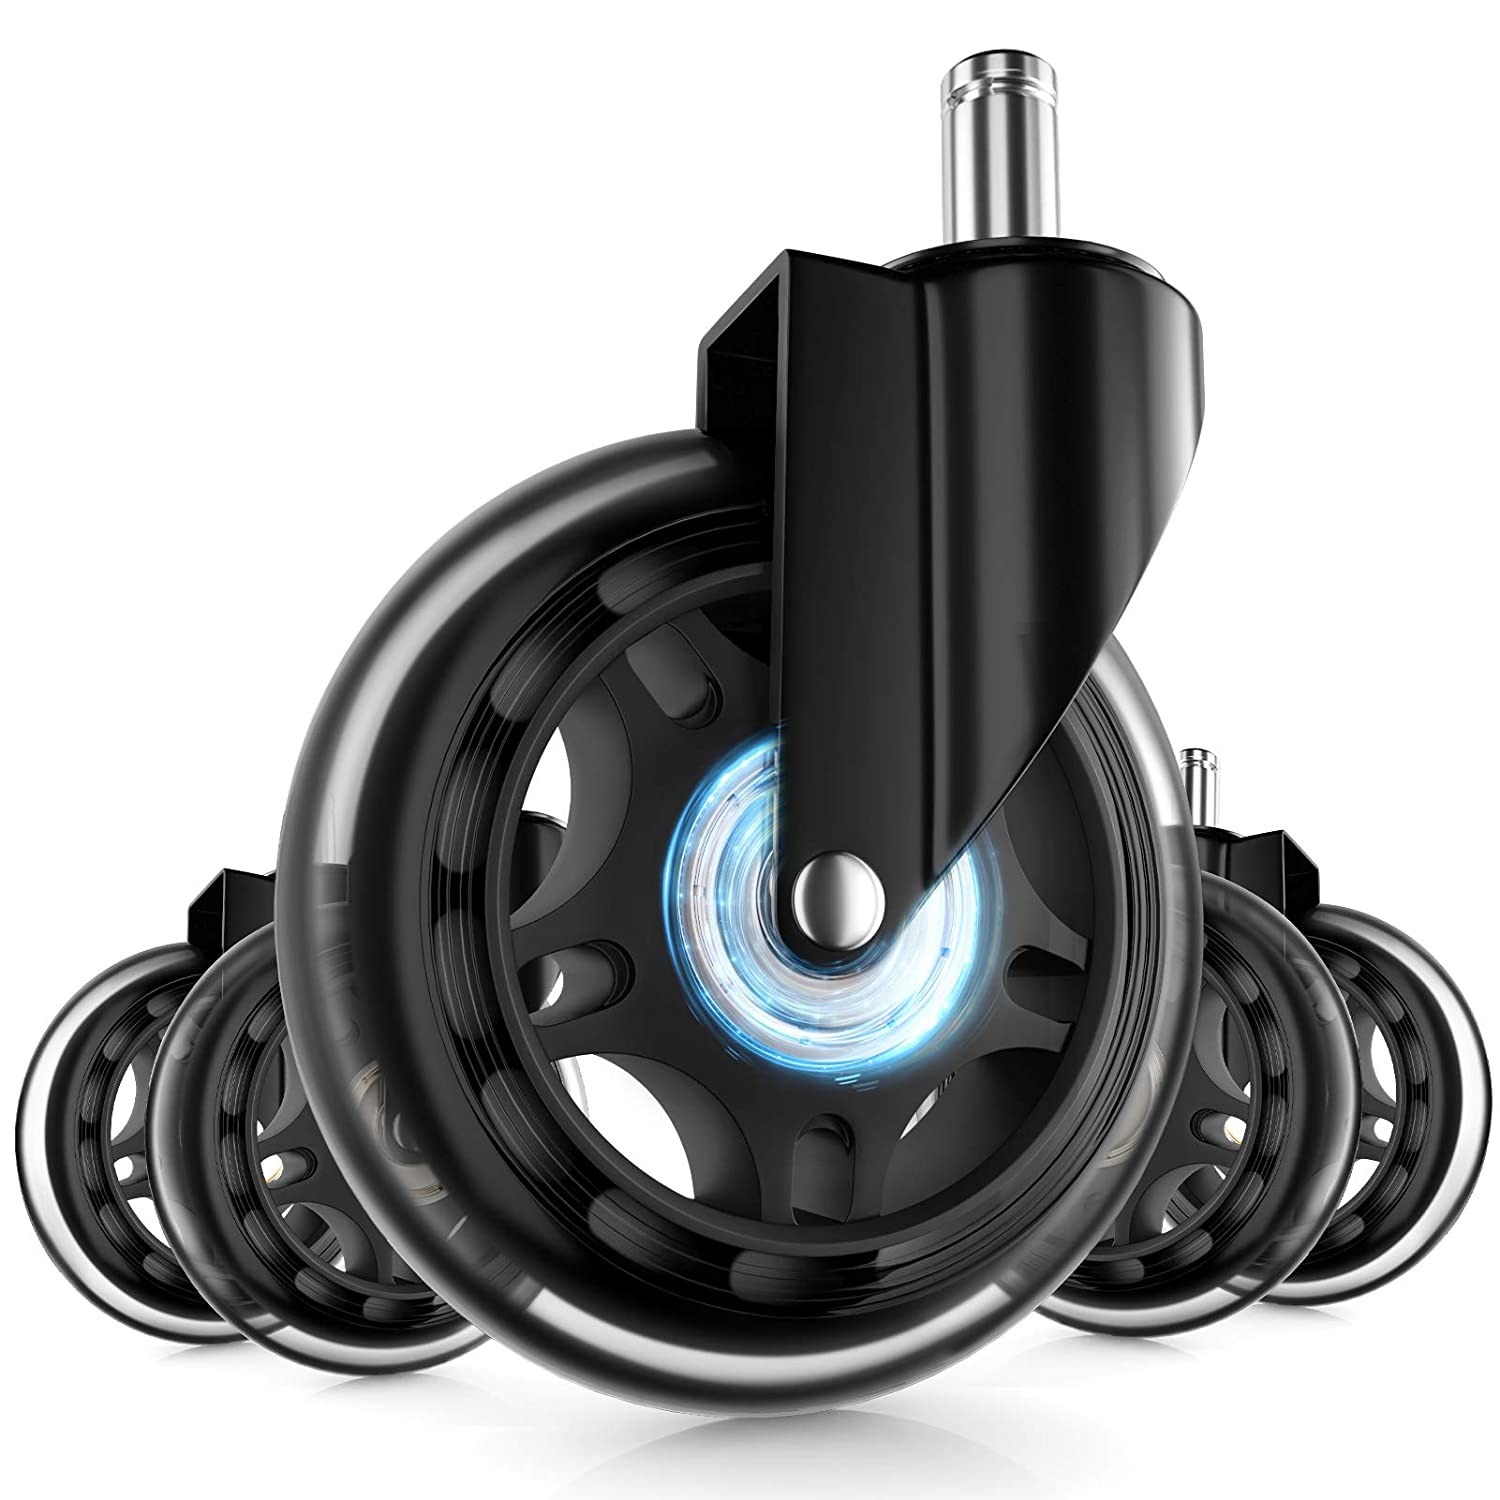 Ameriergo Office Chair Caster Wheels Set of 5 $10 + Free Shipping w/ Prime or on orders $25+